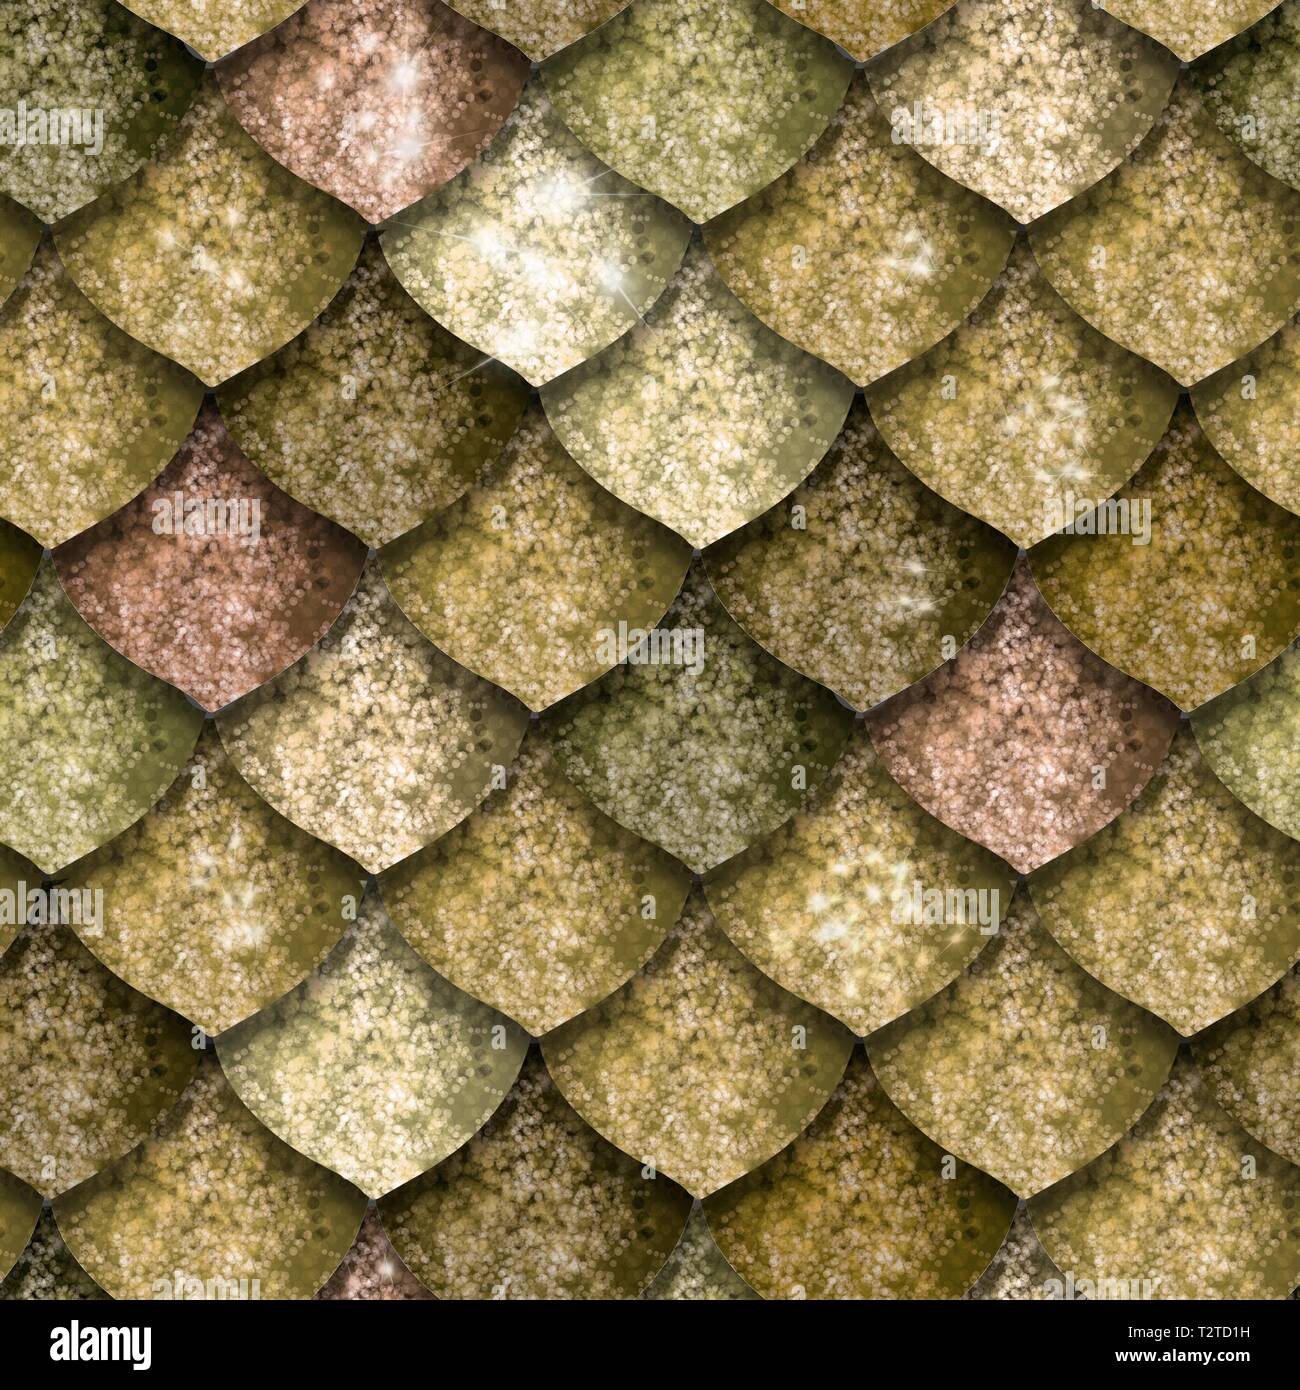 Reptile Scales Pattern background, Stock image